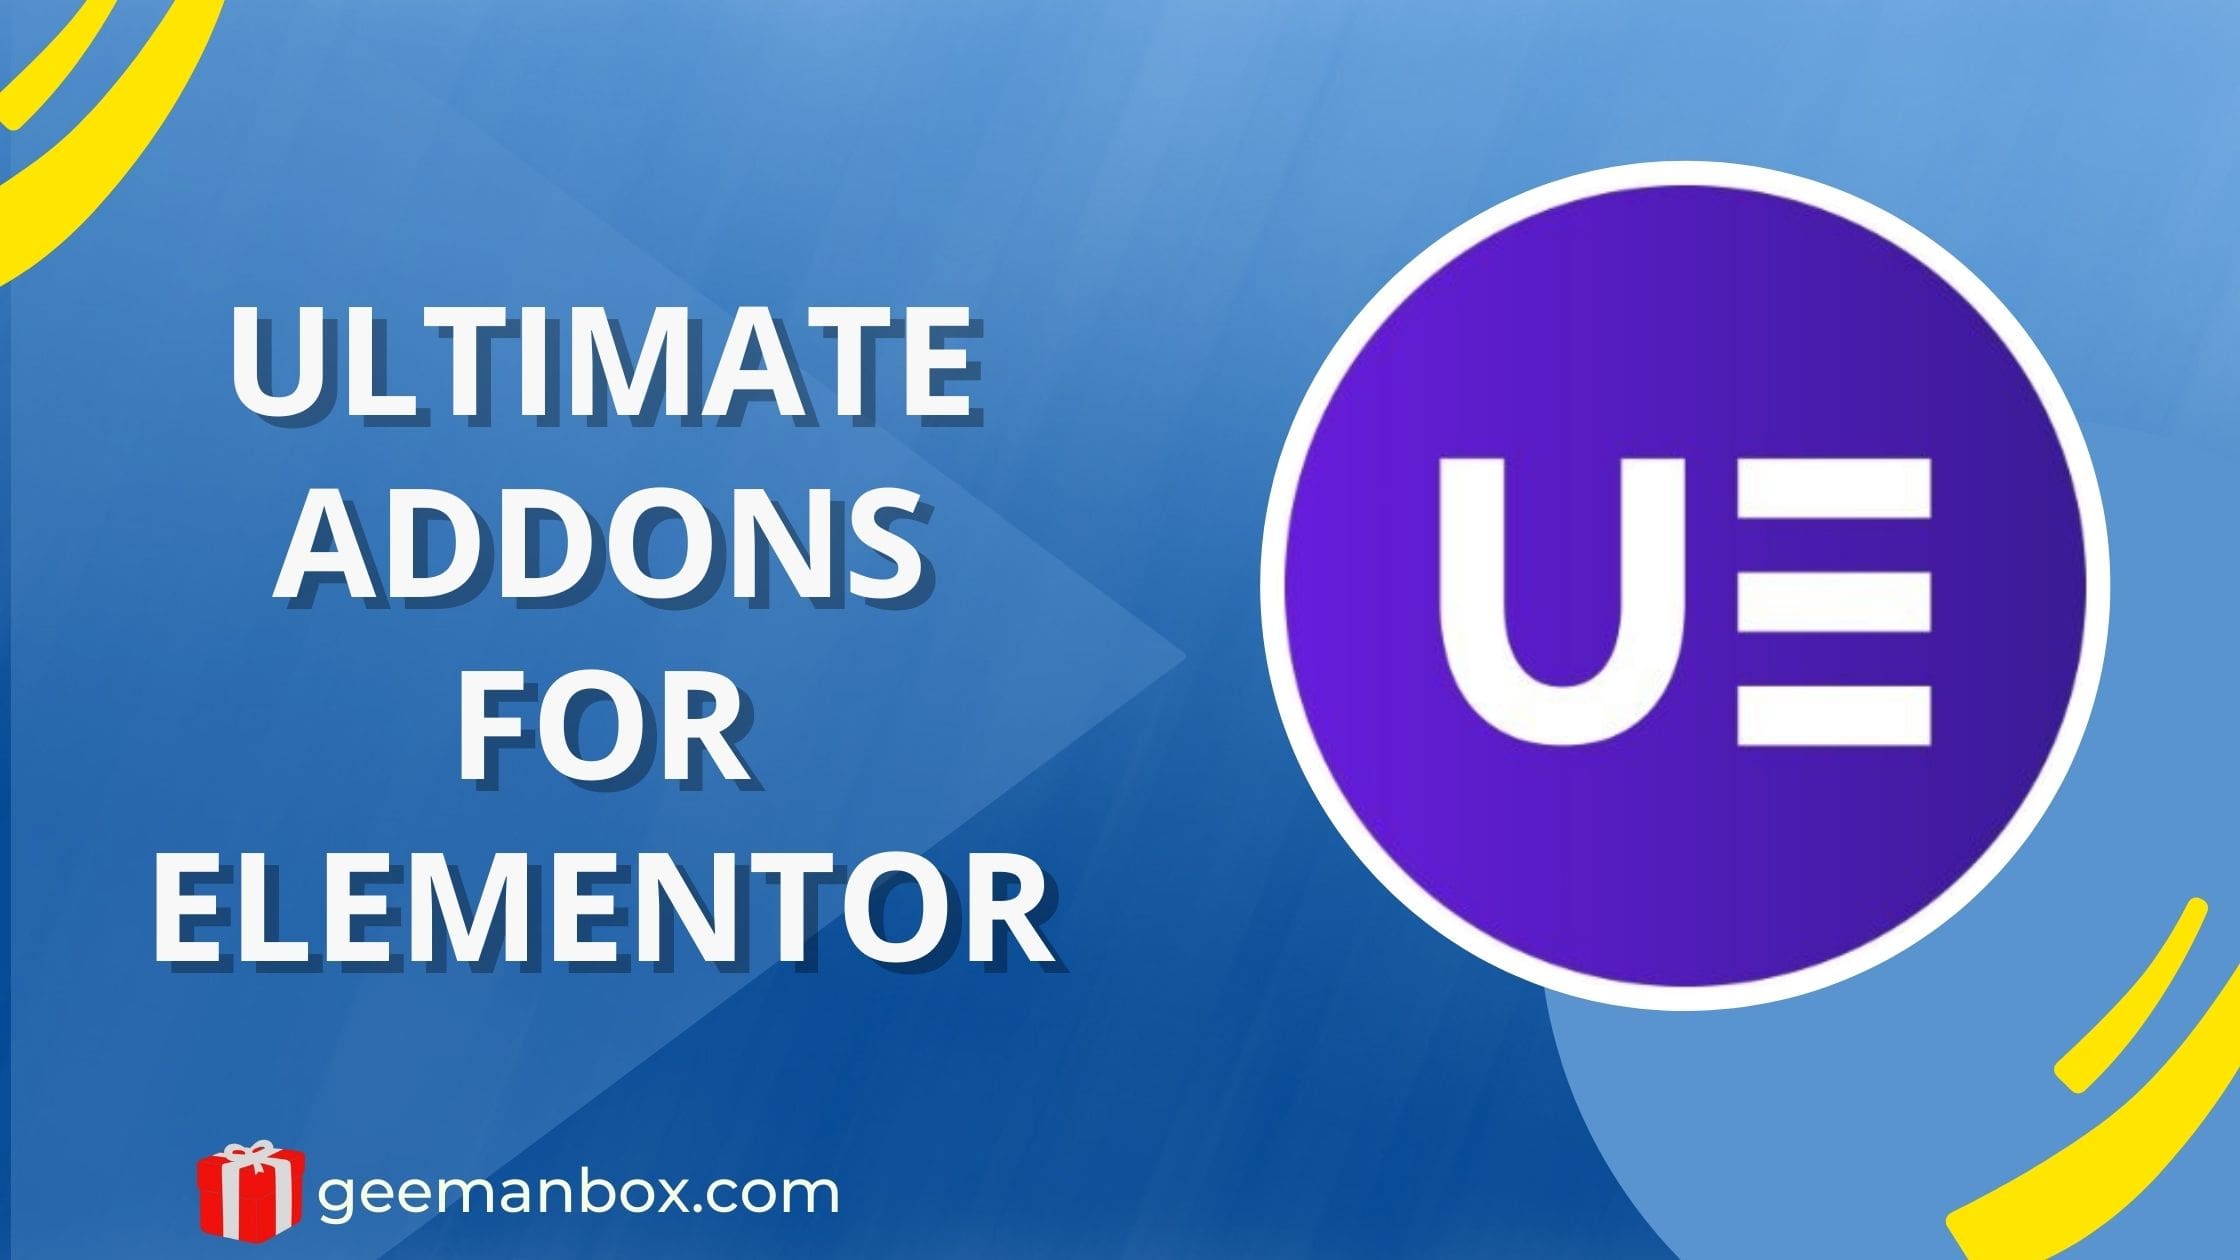 Ultimate Addons for Elementor: Taking Your Website Design to the Next Level